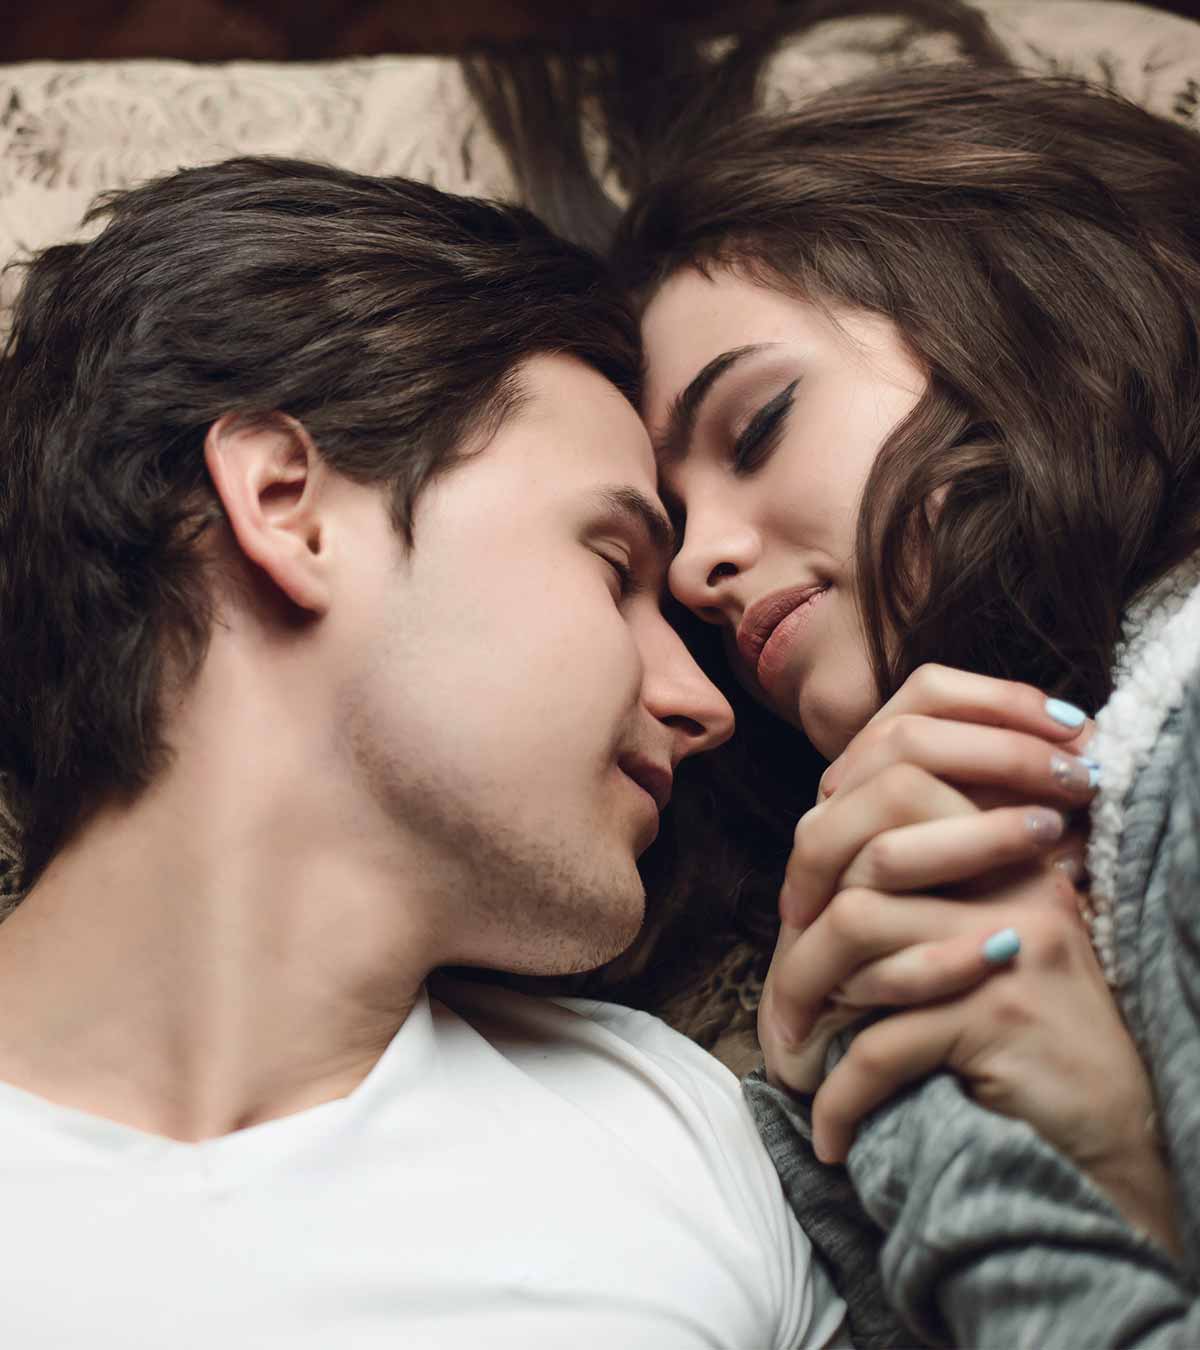 Best Couple Sleeping Positions To Bond Over A Good Night